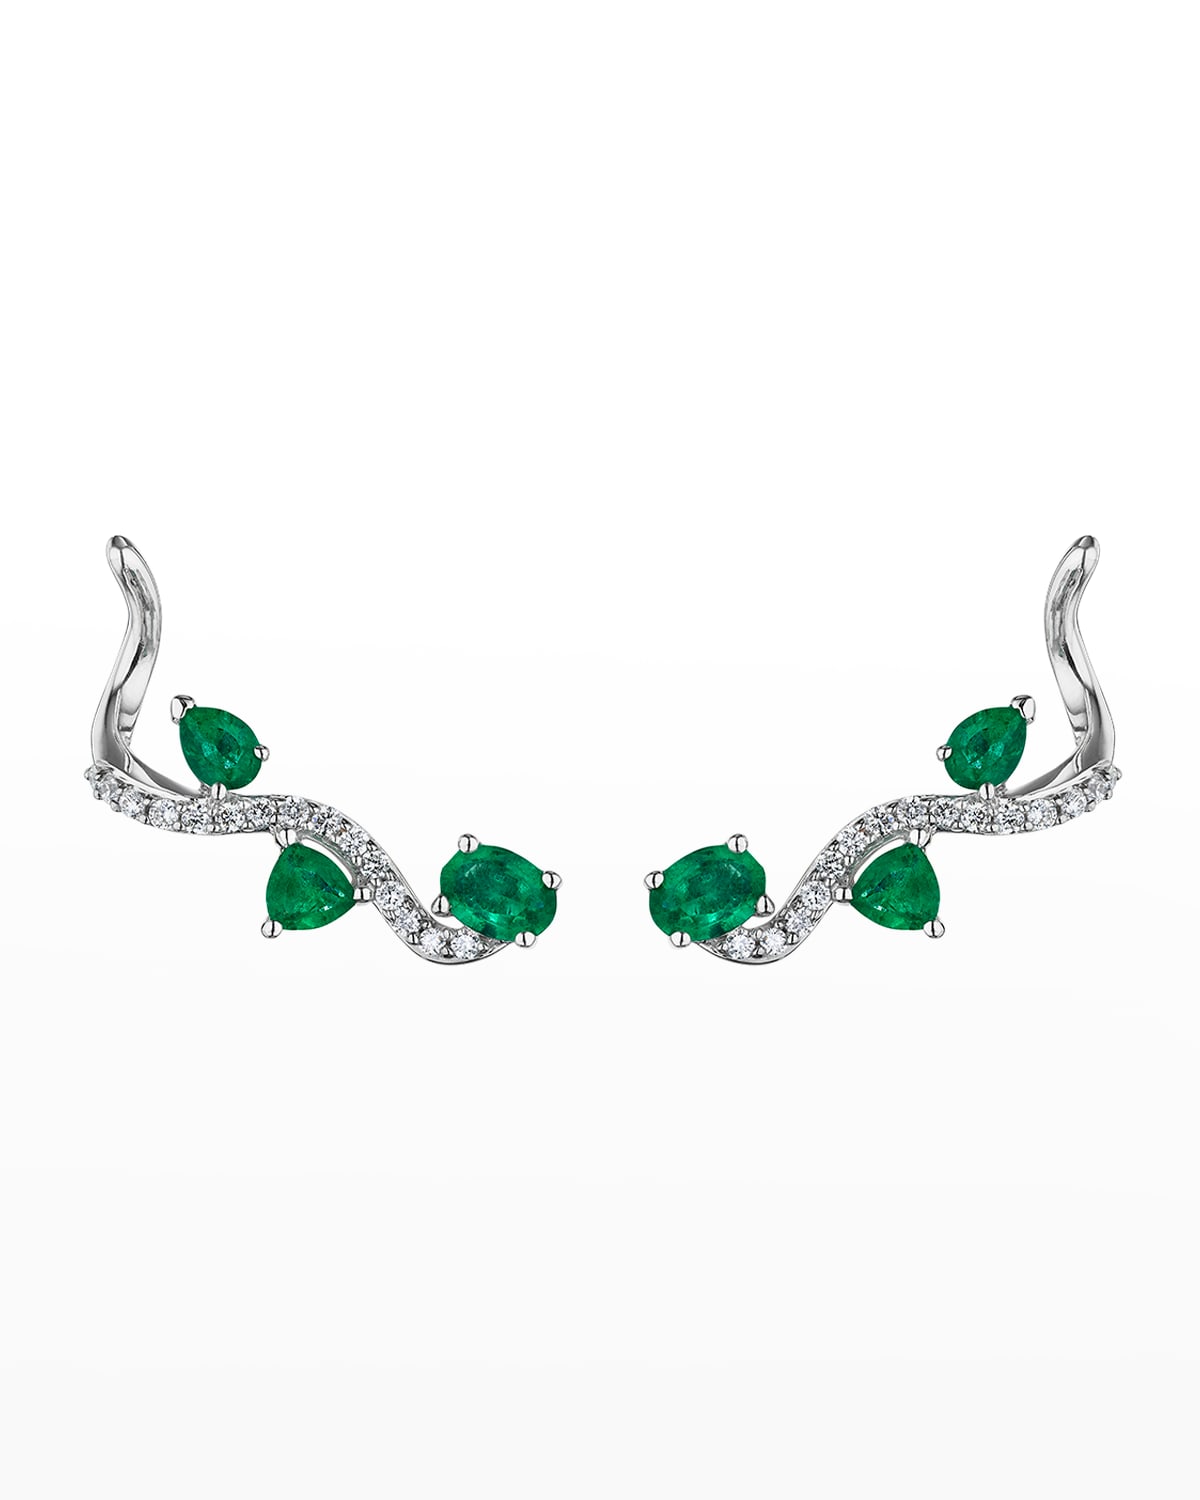 Mirage White Gold Earrings with Diamonds and Emeralds